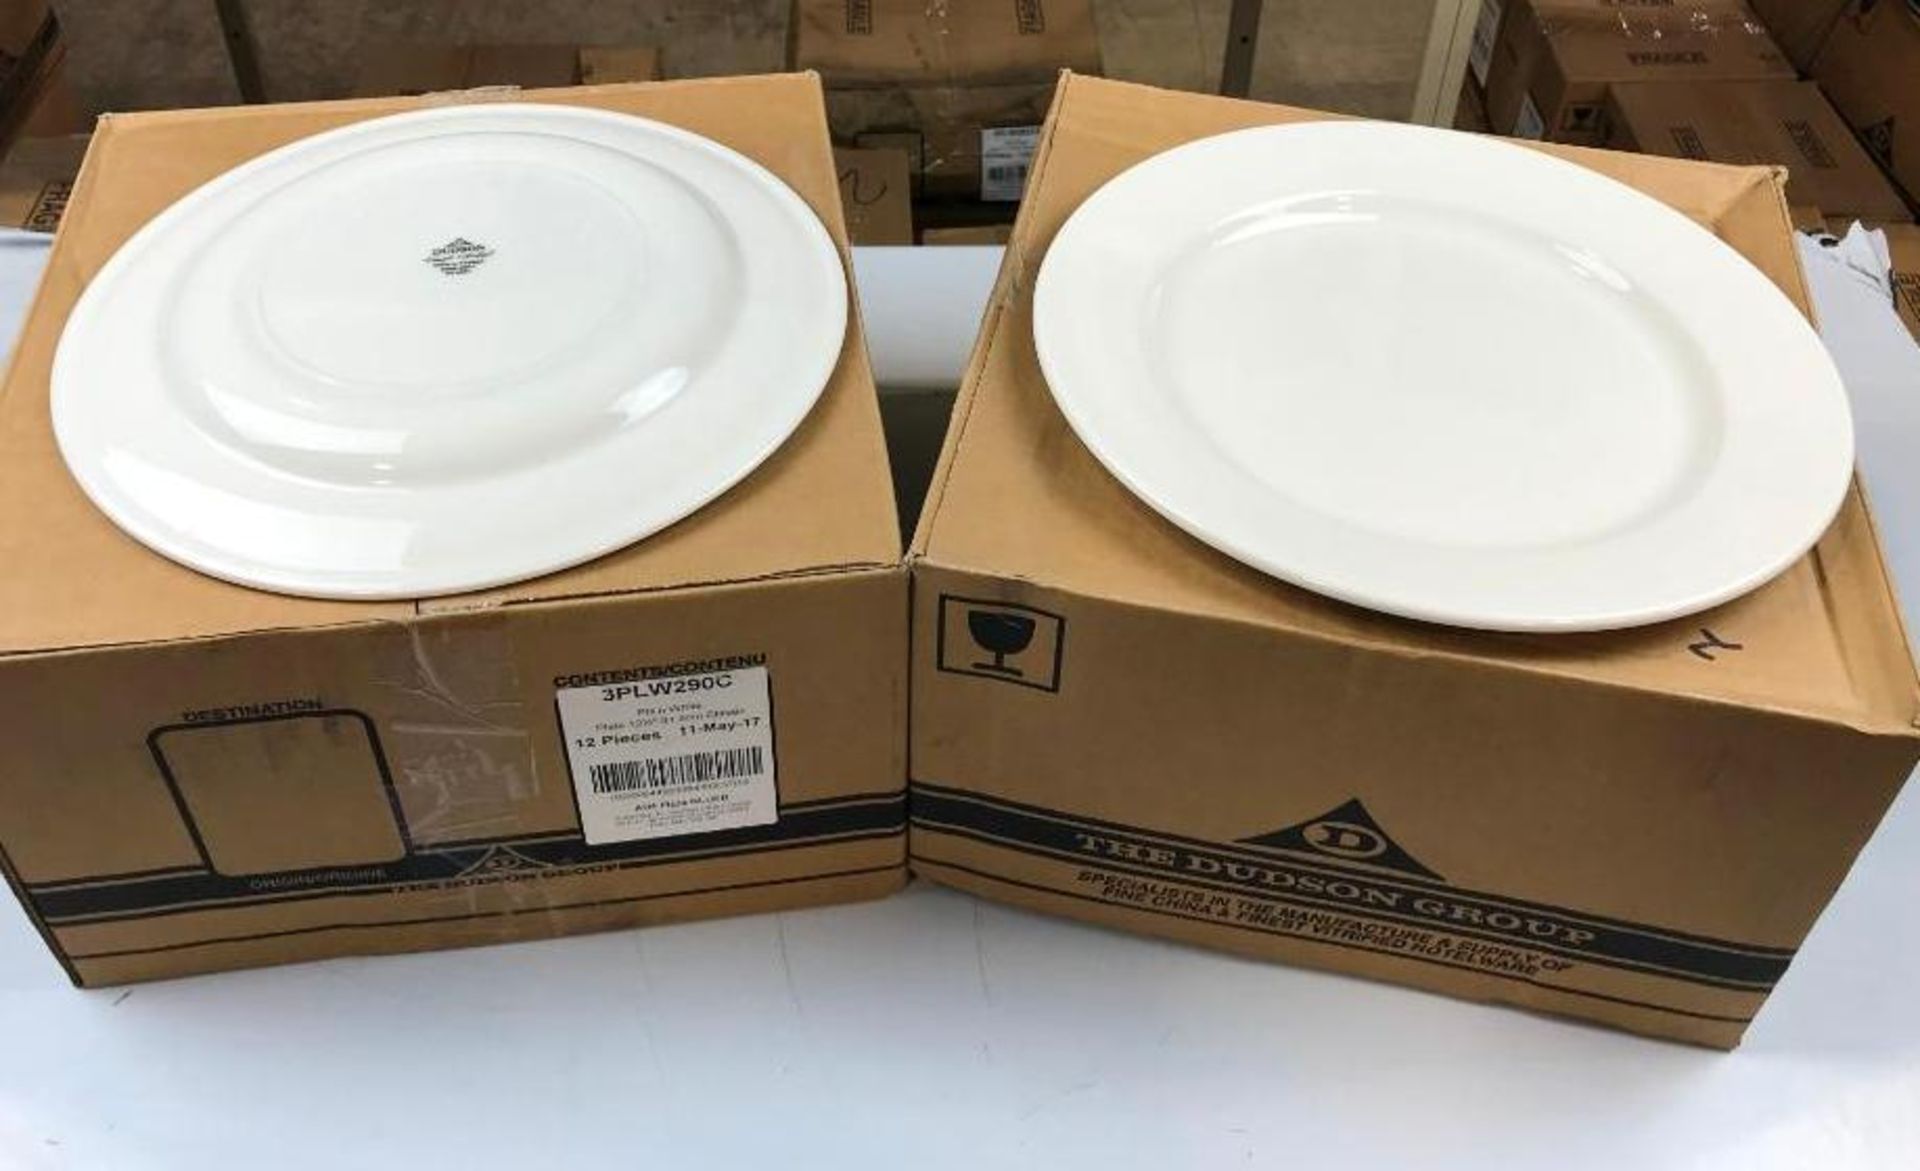 2 CASES OF DUDSON CLASSIC PLATE 12.5" - 12/CASE, MADE IN ENGLAND - Image 5 of 6